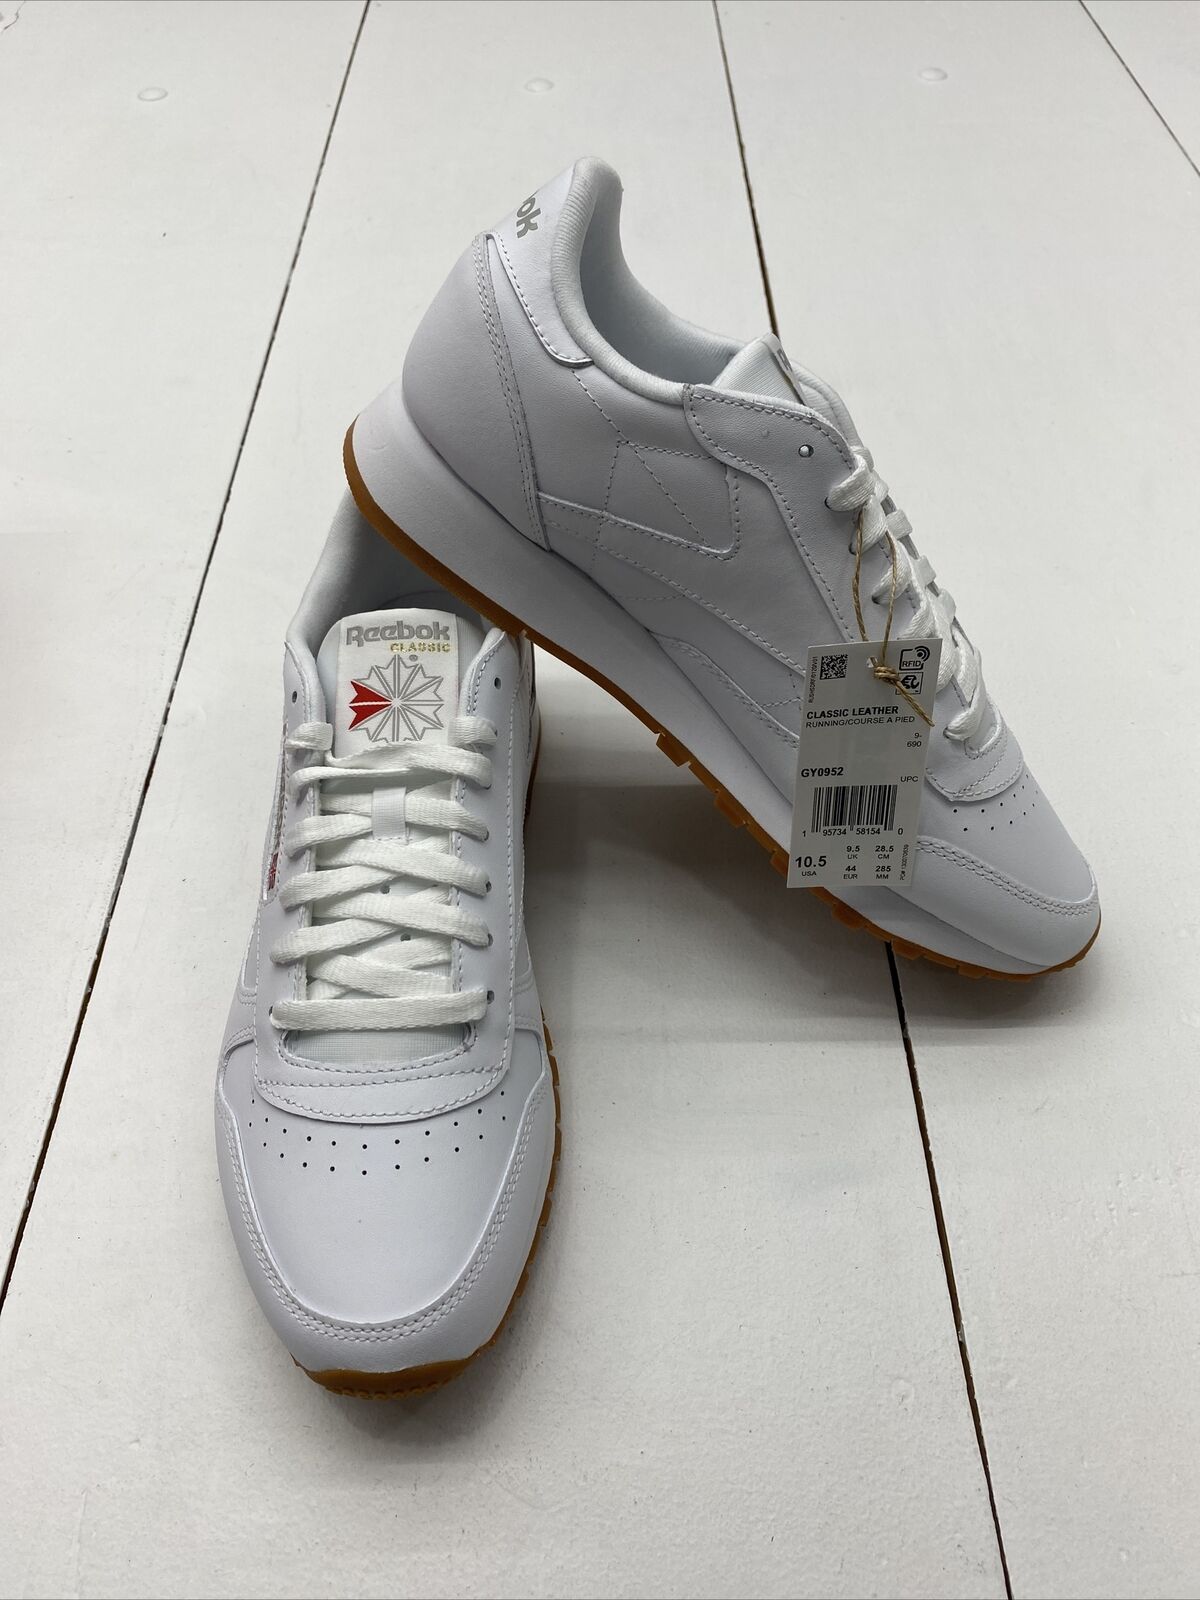 10 Sneaker Classic Leather Reebok Women Size - beyond exchange Unisex-Adult GY0952 White